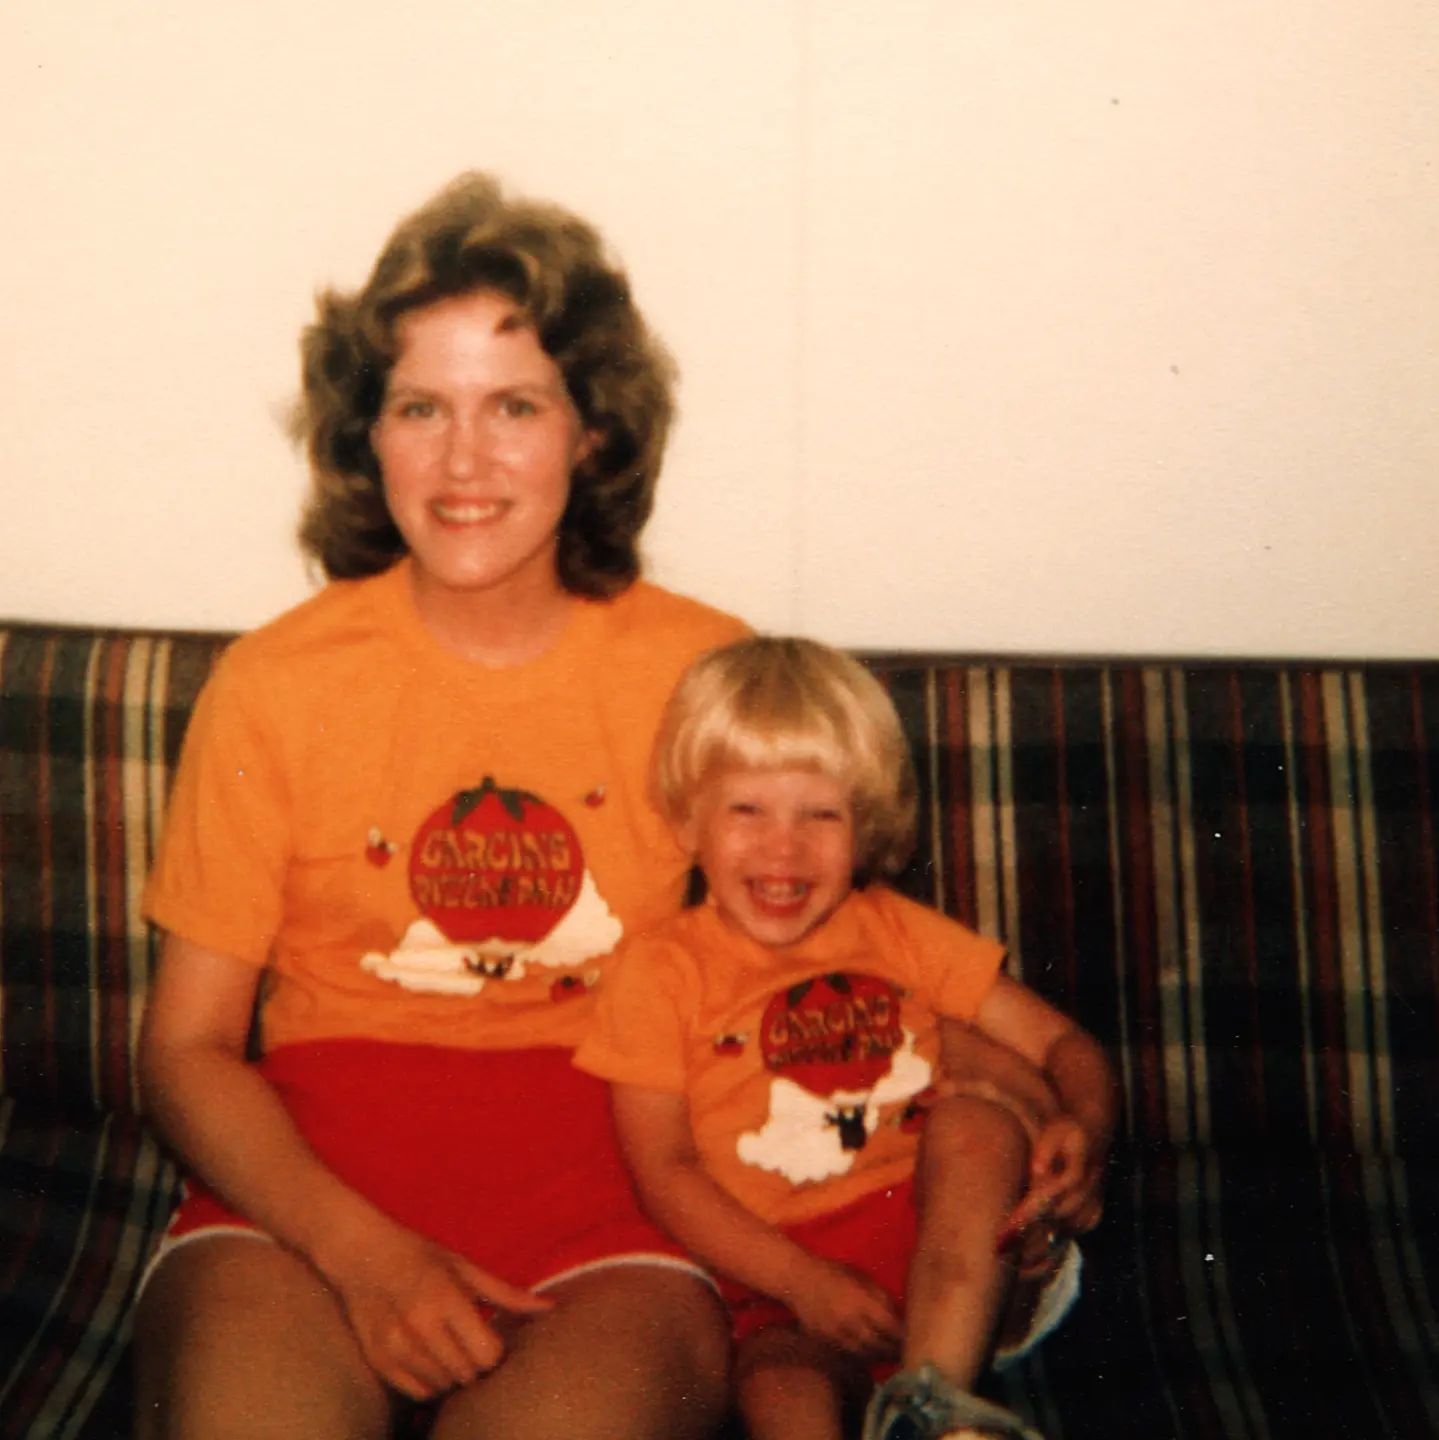 Sometime in the mid-80s. My mom rules! 

#mothersday